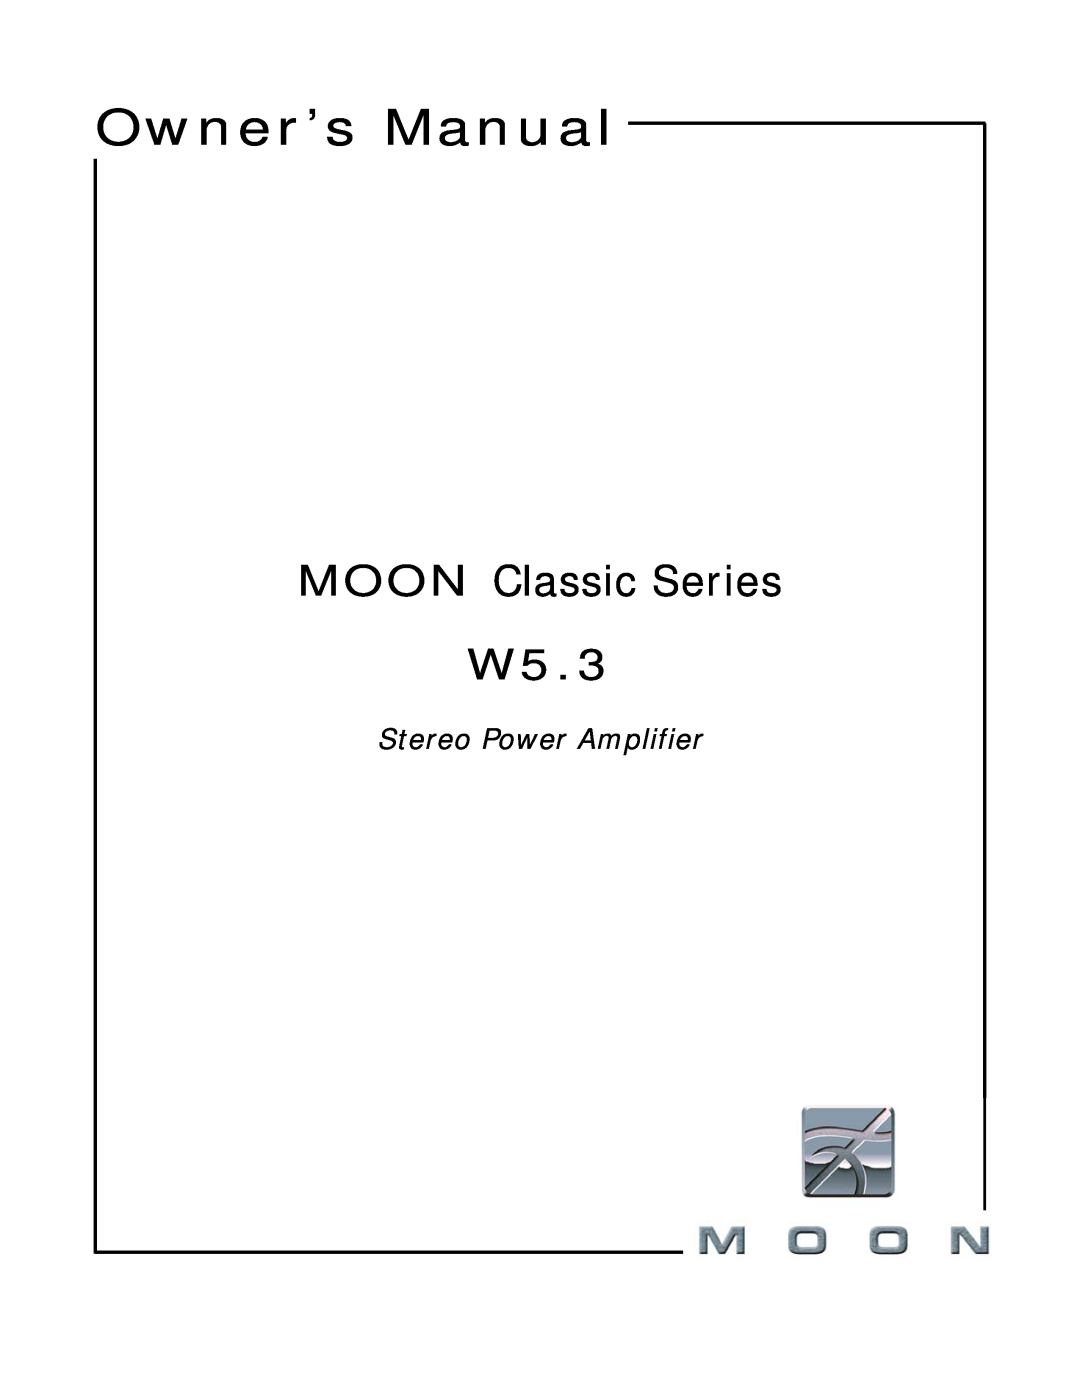 Simaudio owner manual MOON Classic Series W5.3, Stereo Power Amplifier 